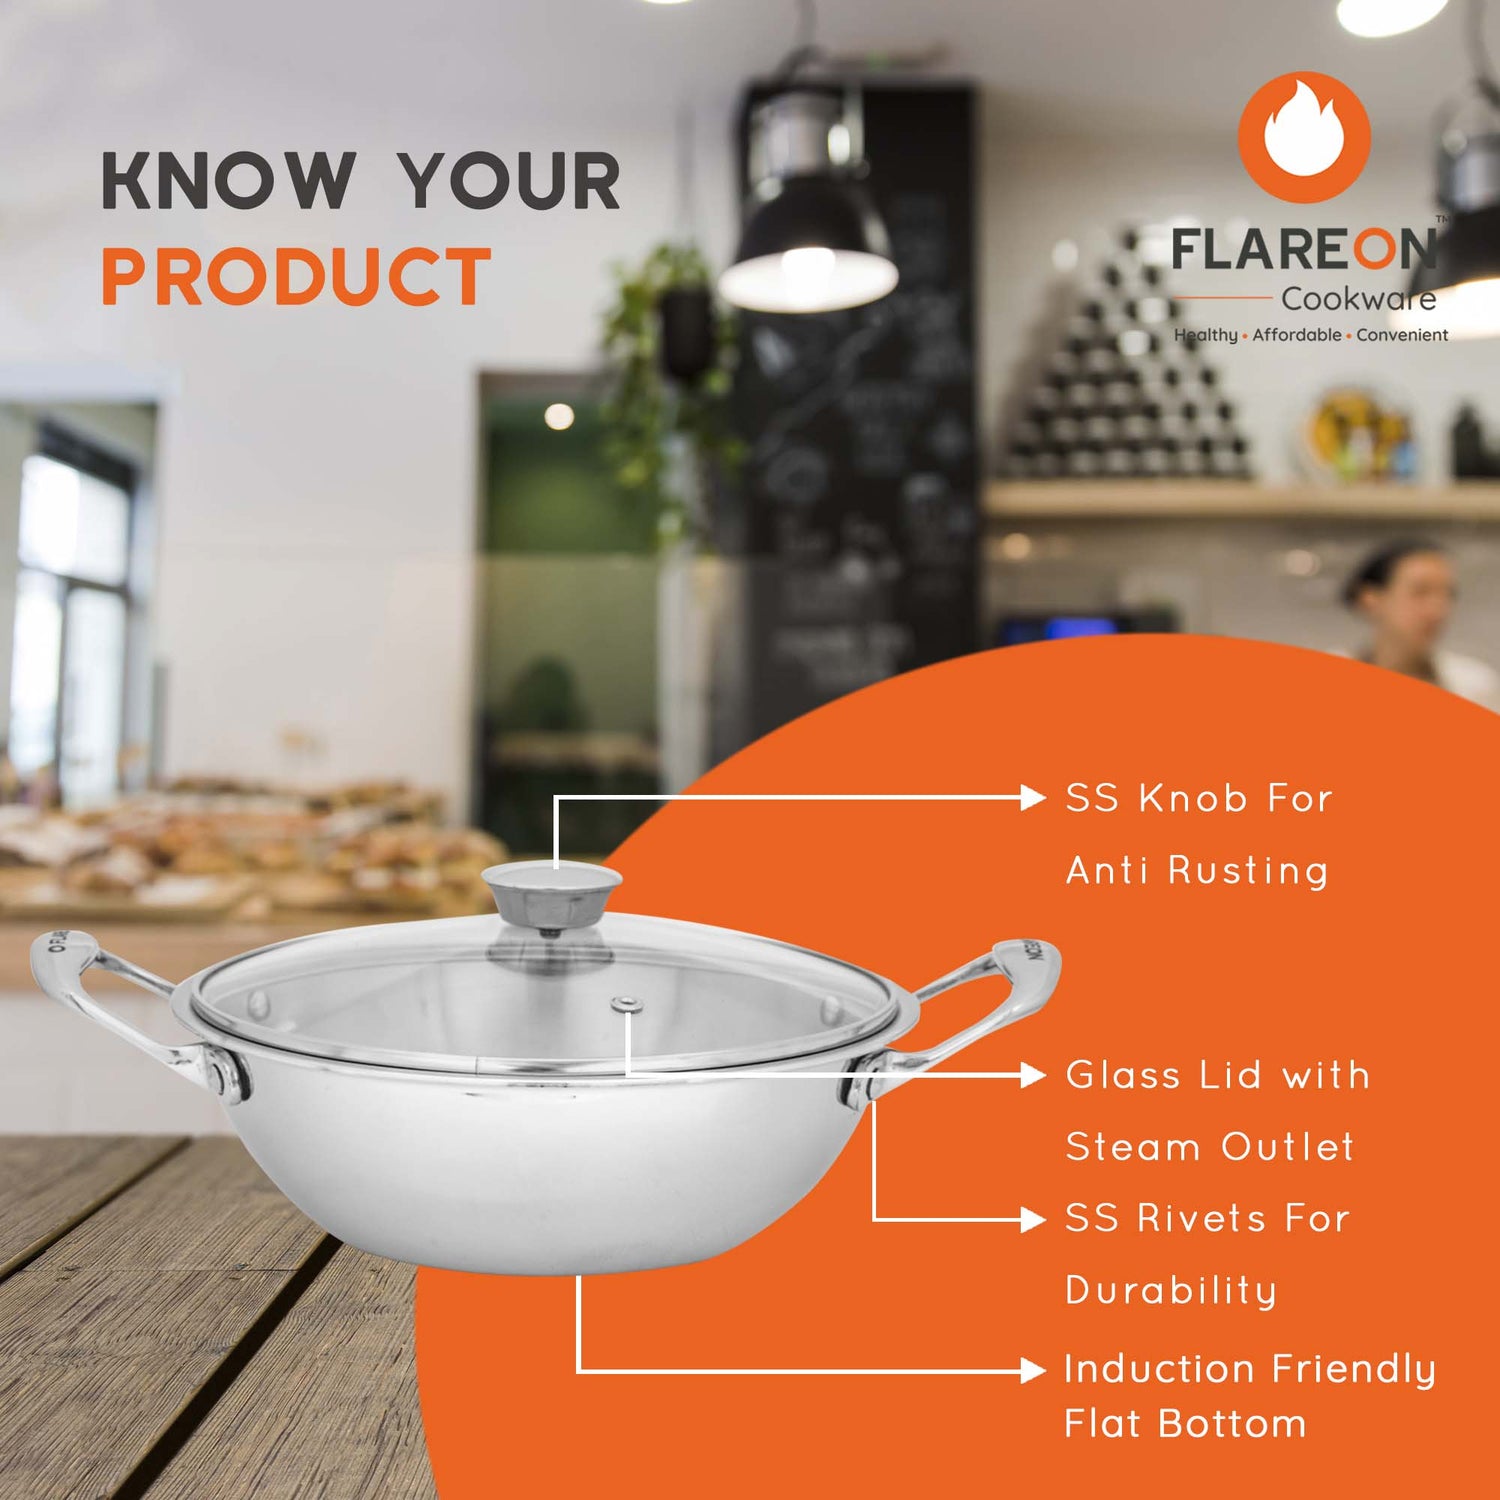 FlareOn's TriPly Stainless Steel Kadai With Glass Lid 24 Cm- Know Your Product